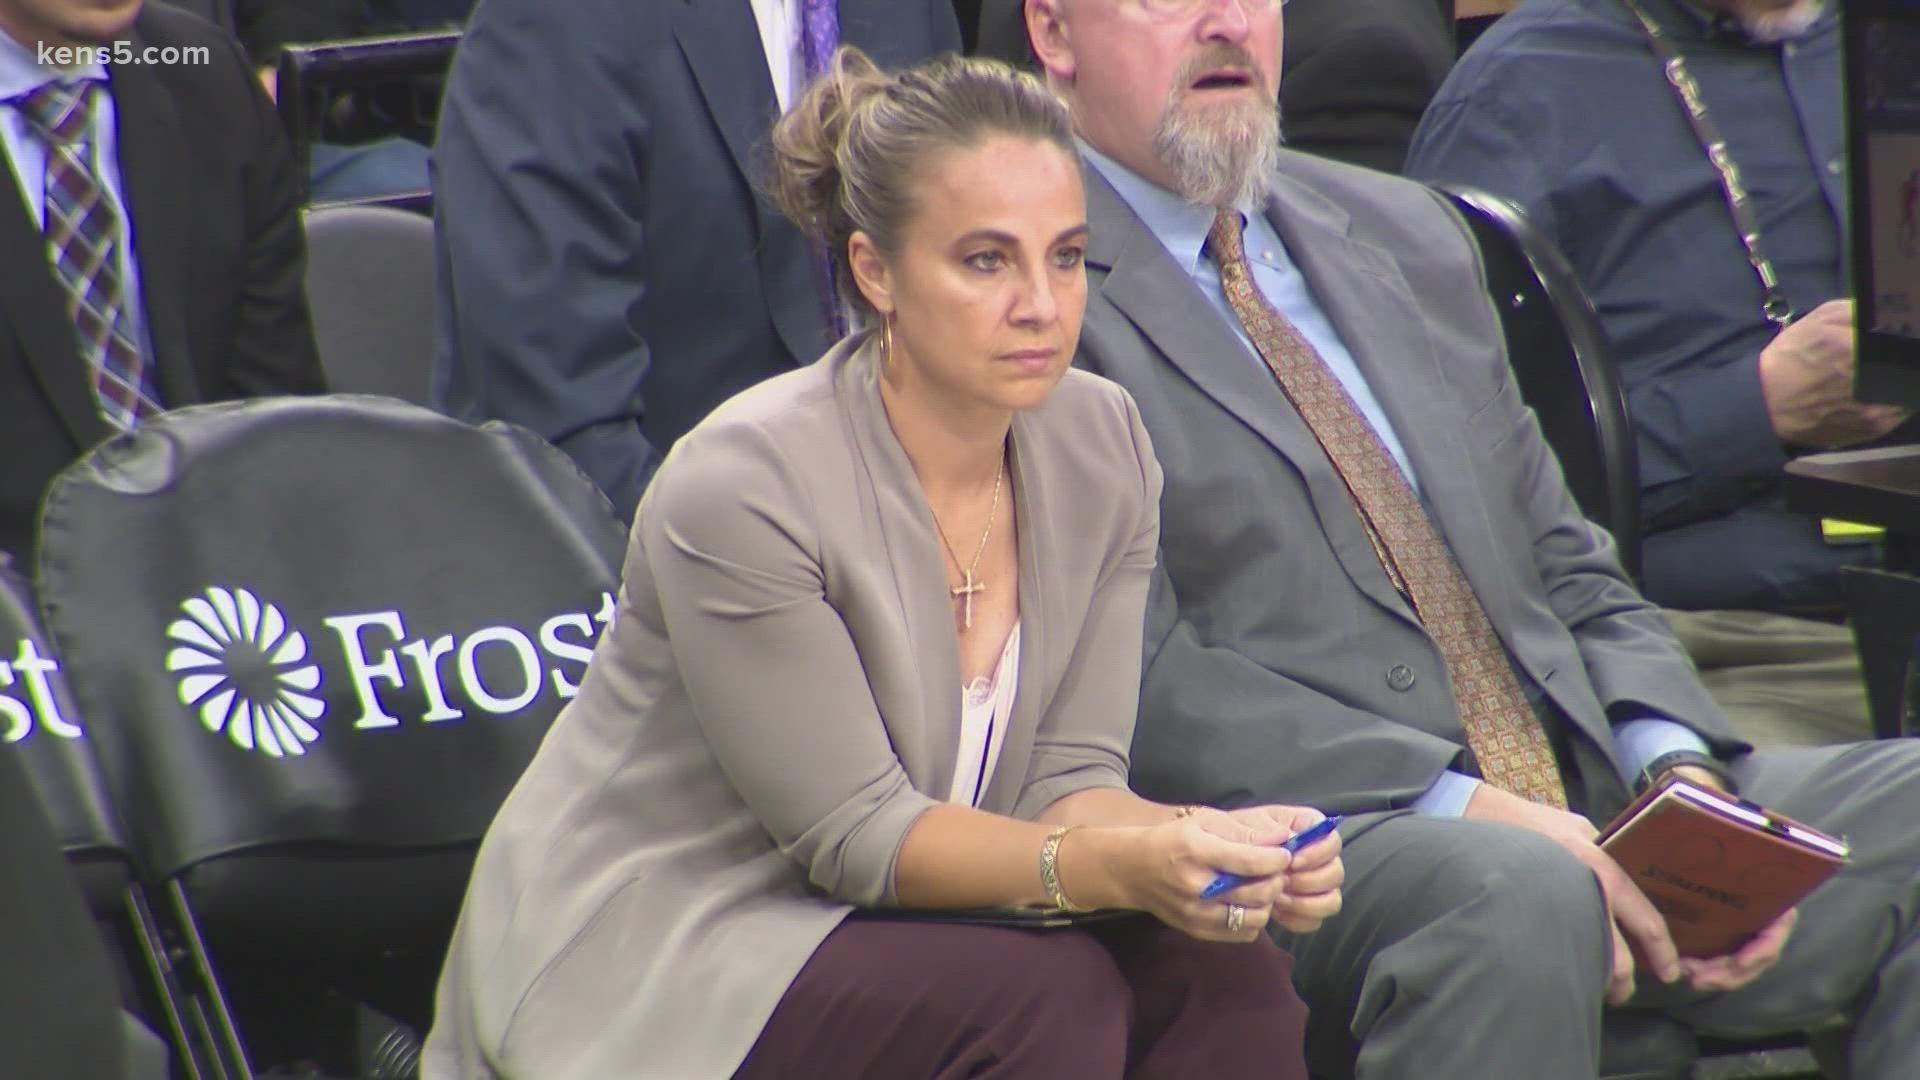 The WNBA legend has been with the San Antonio Spurs since 2014 as an assistant coach, and will reportedly remain with the team through the end of the season.